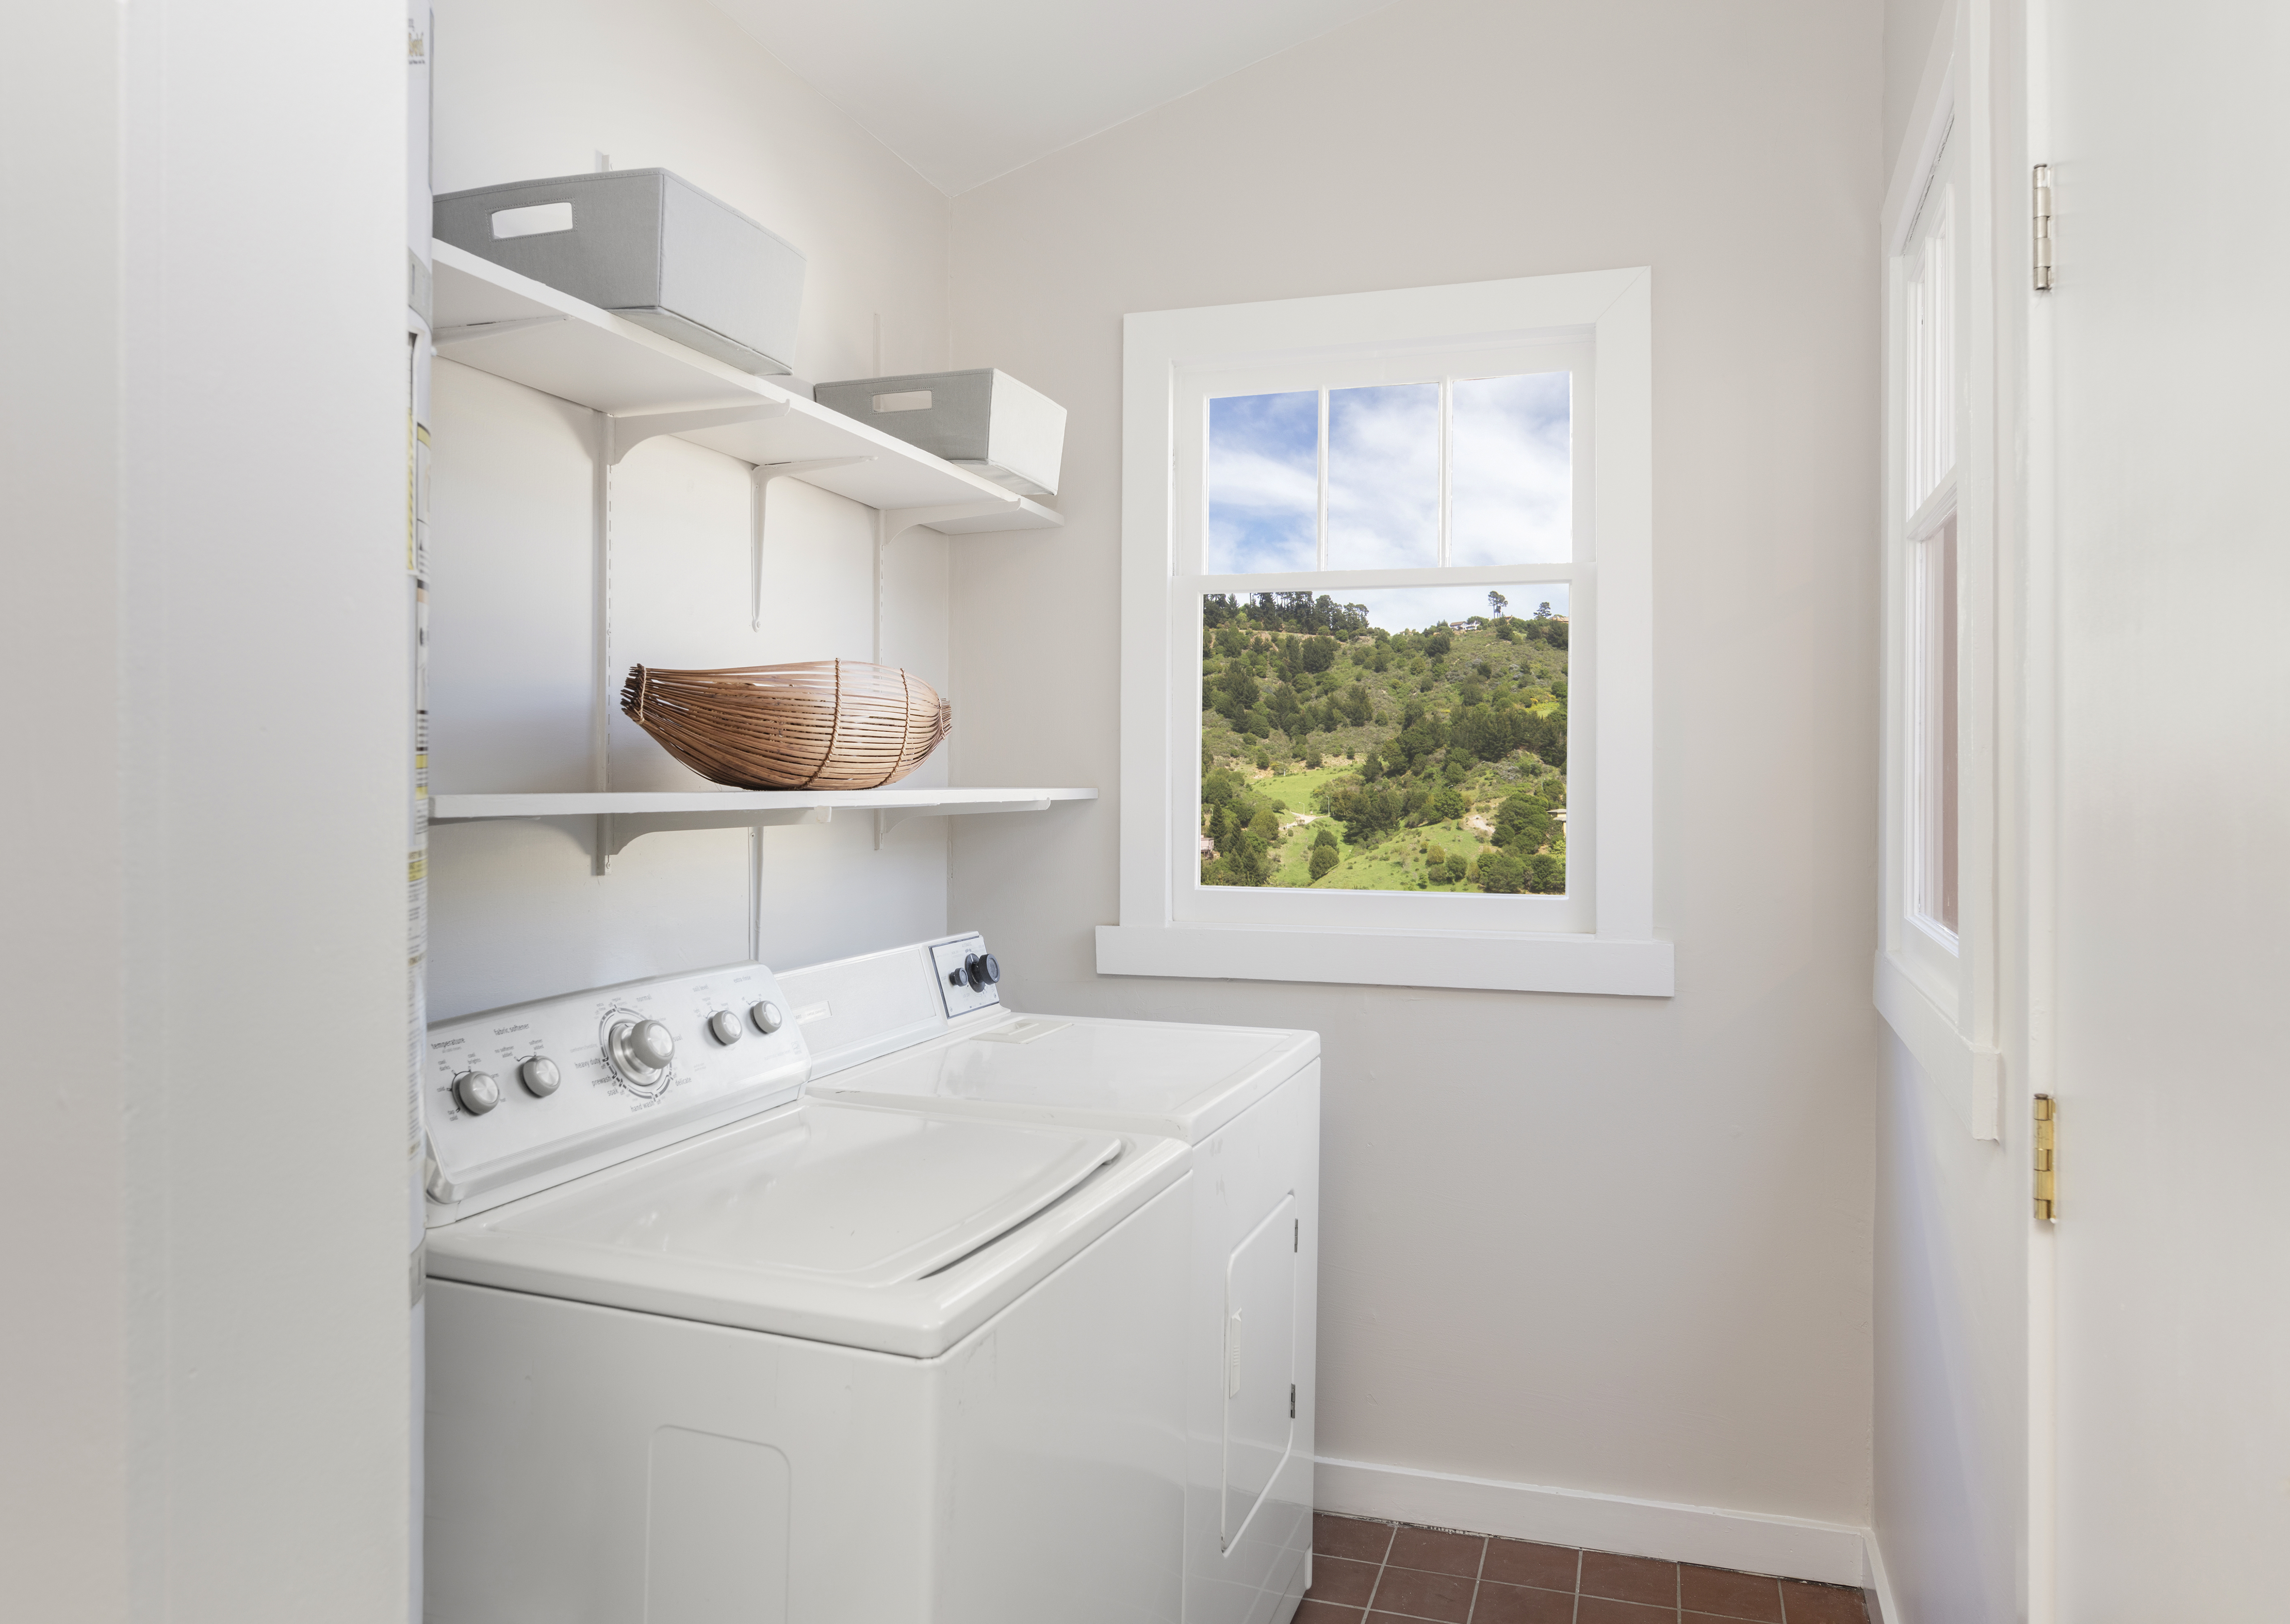 Clean Laundry Room